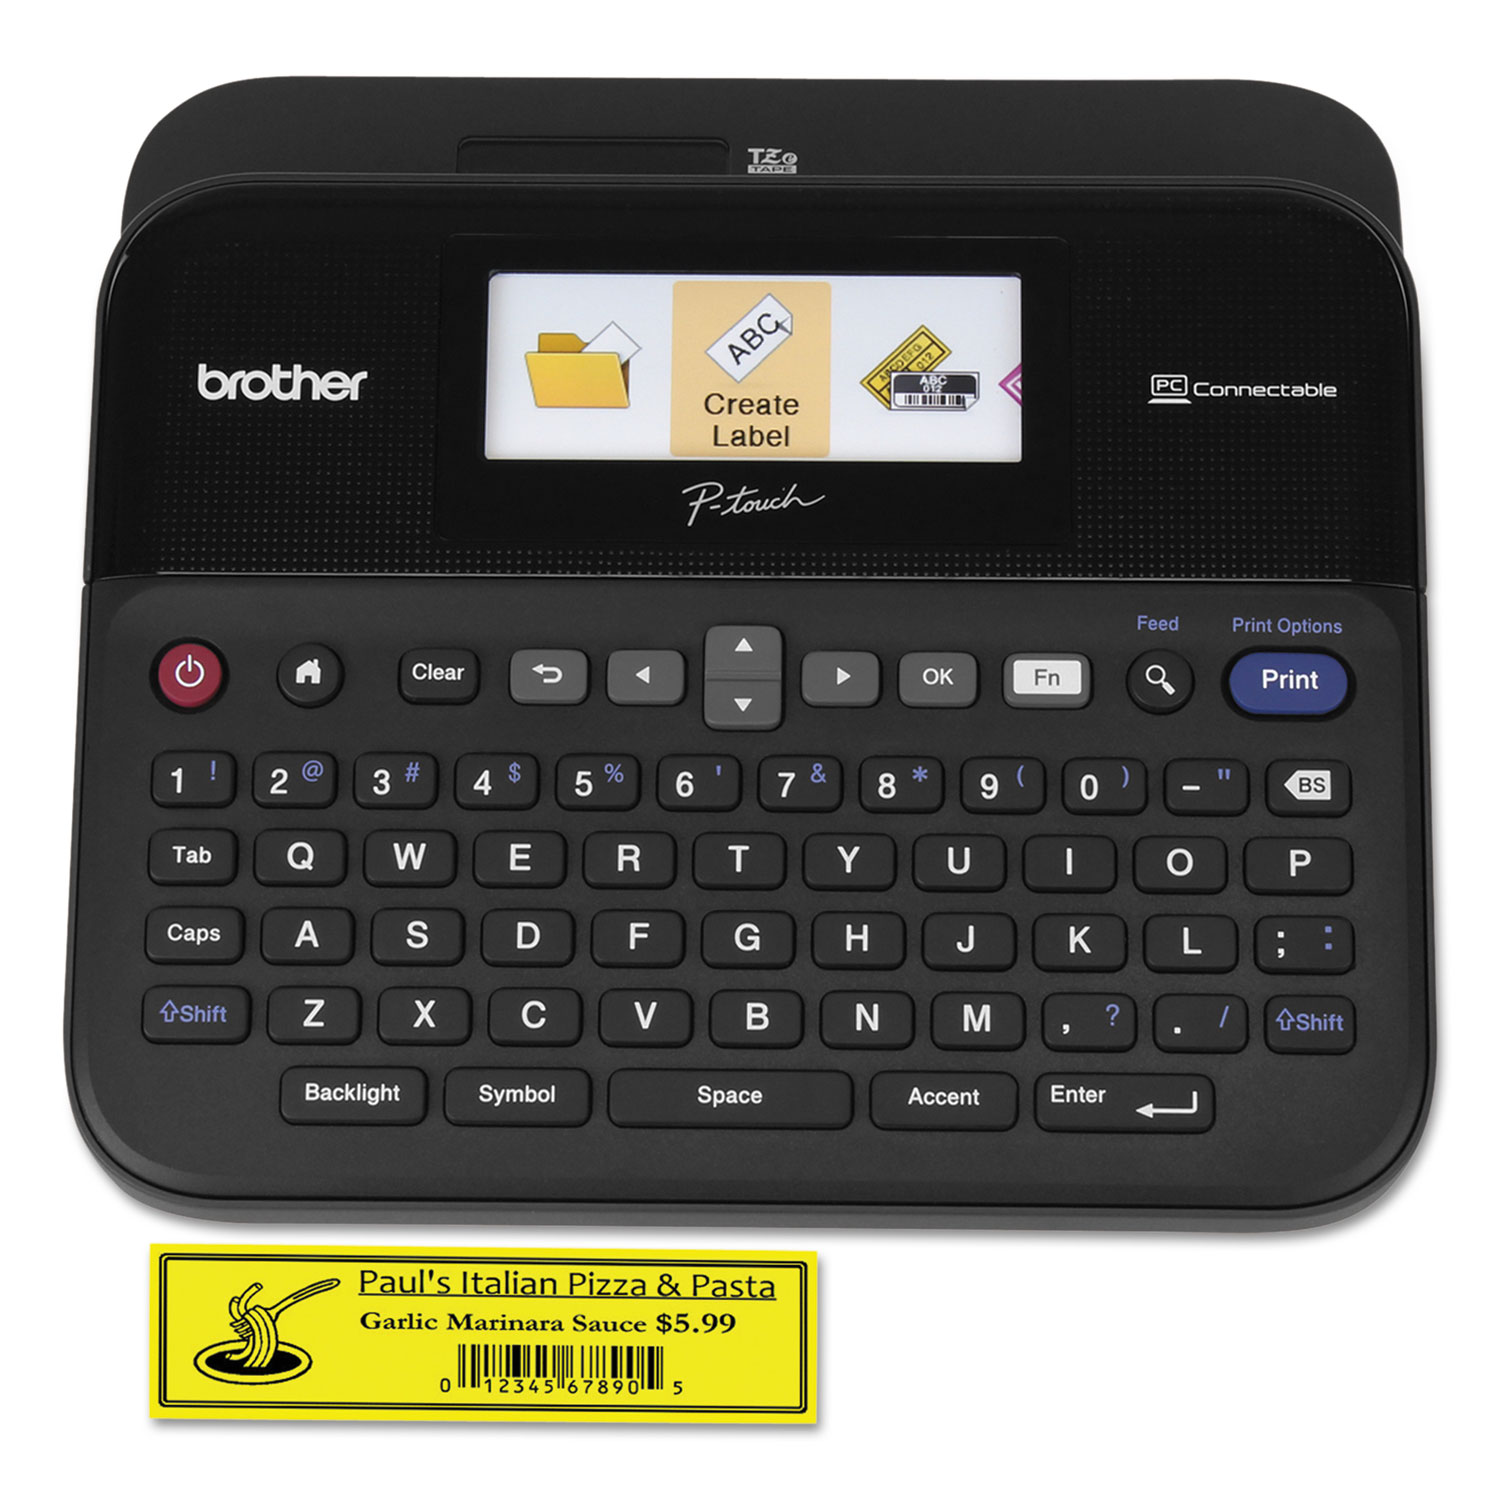  Brother P-Touch PTD600 PTD600 PC-Connectable Label Maker with Color Display (BRTPTD600) 